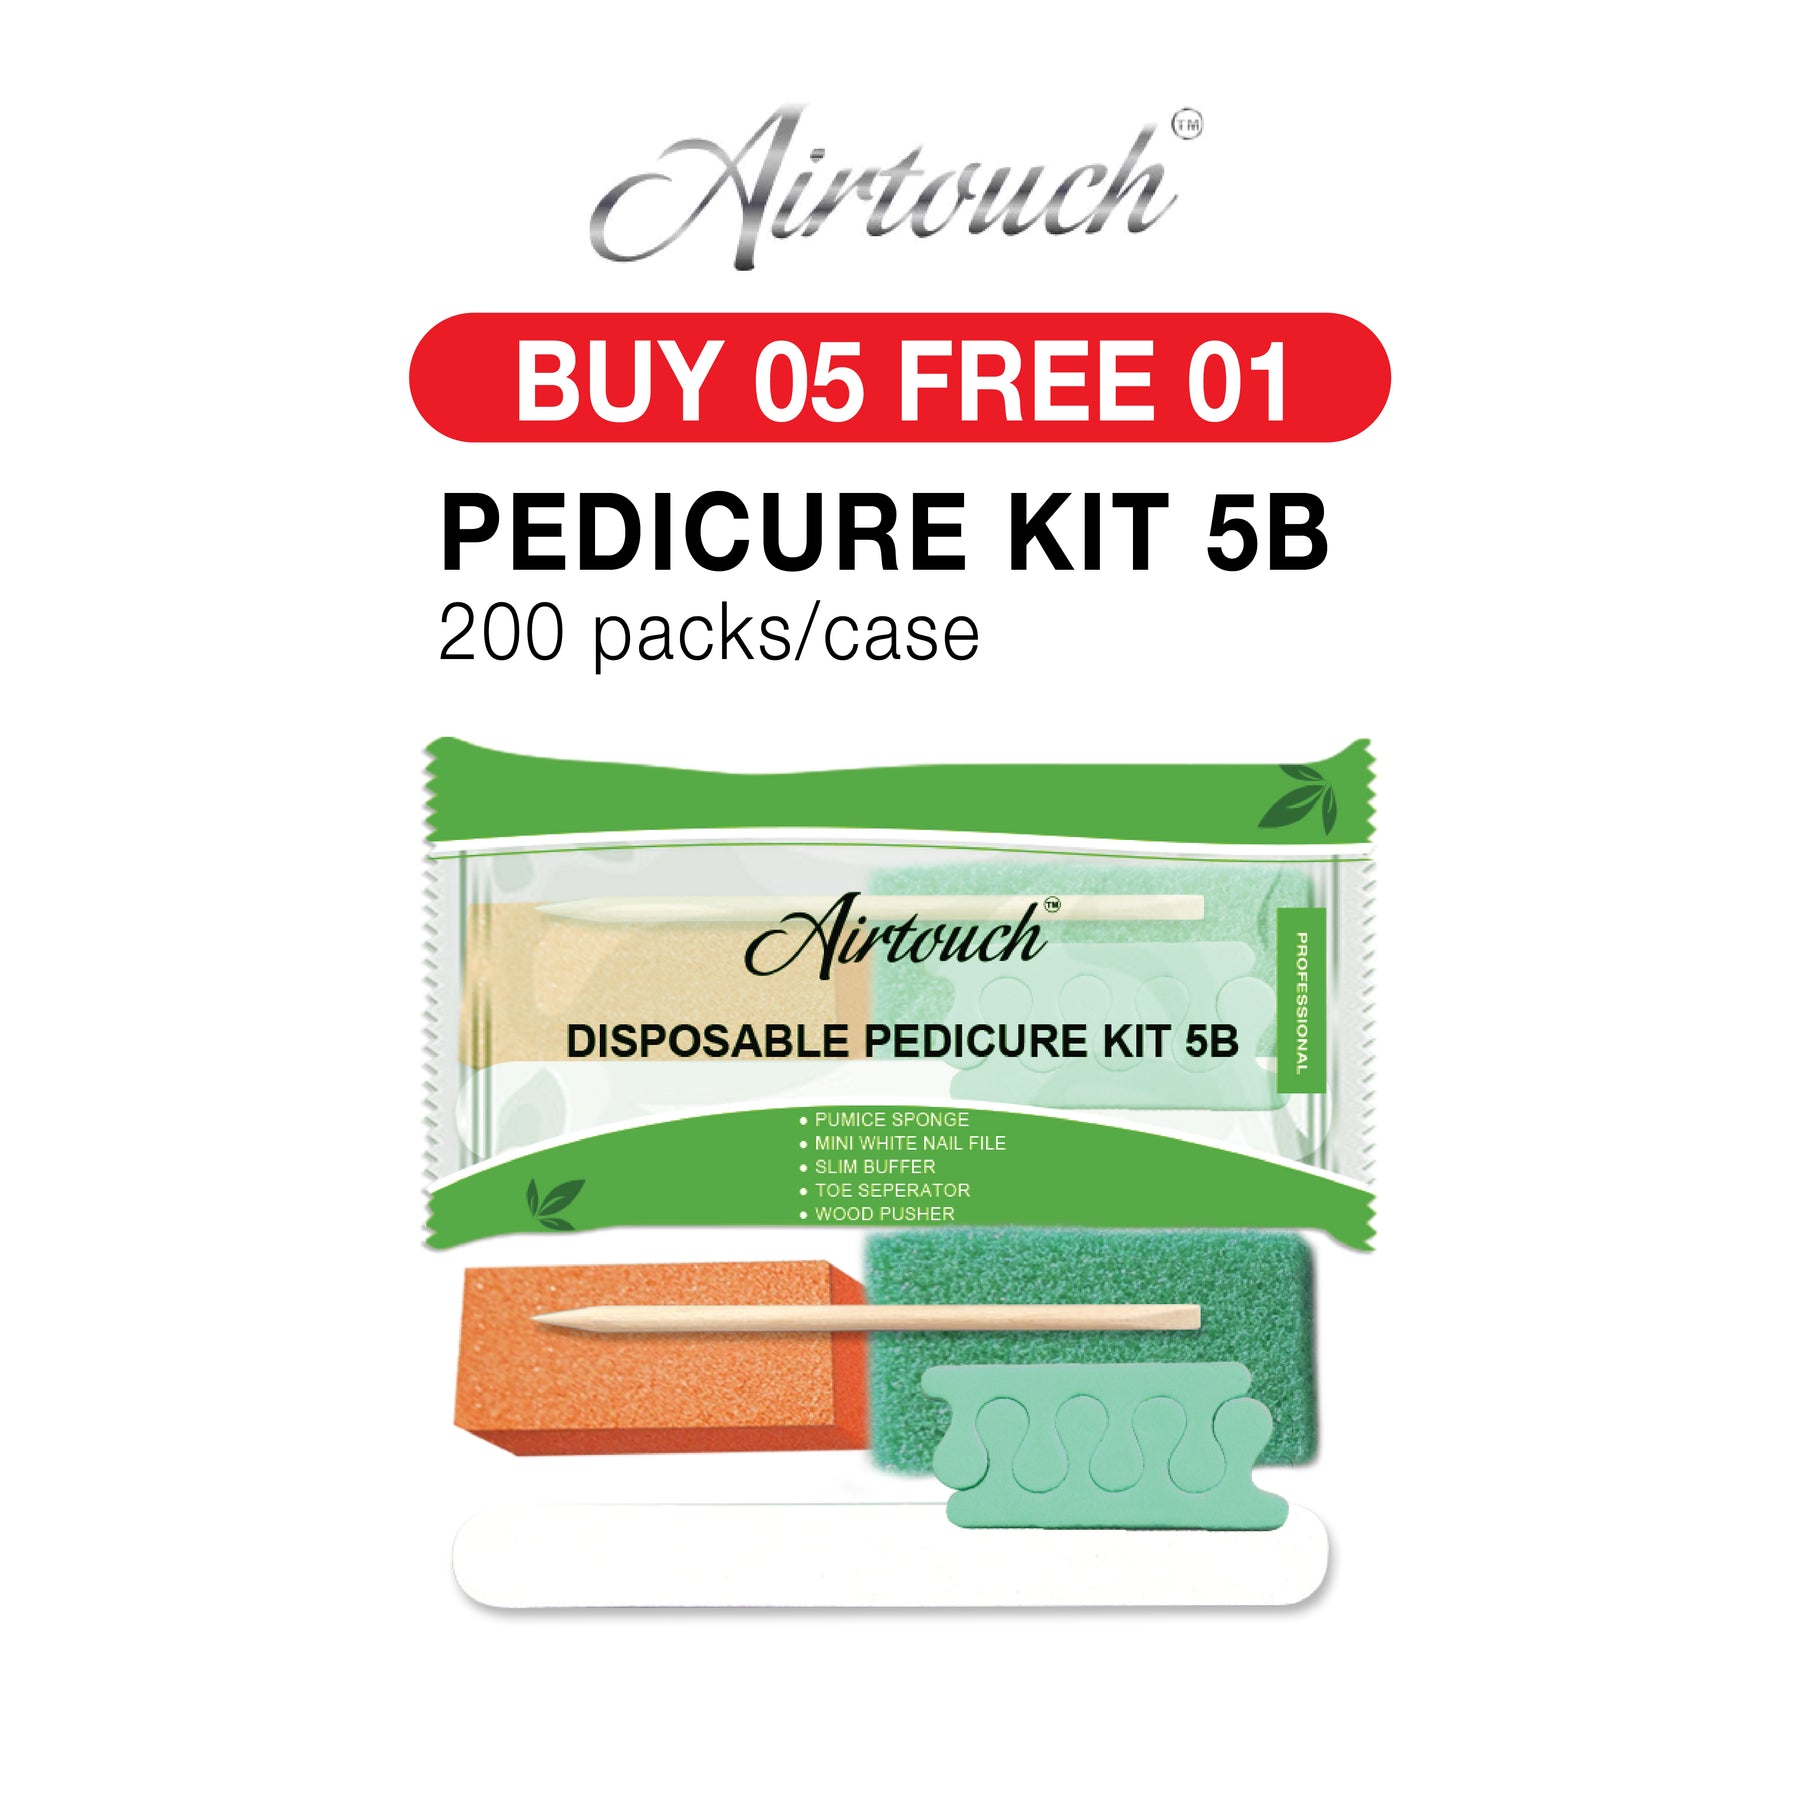 Airtouch Disposable Pedicure Kit 5B, 19341, CASE (PK: 200 sets/case). Buy 05 Get 1 Free